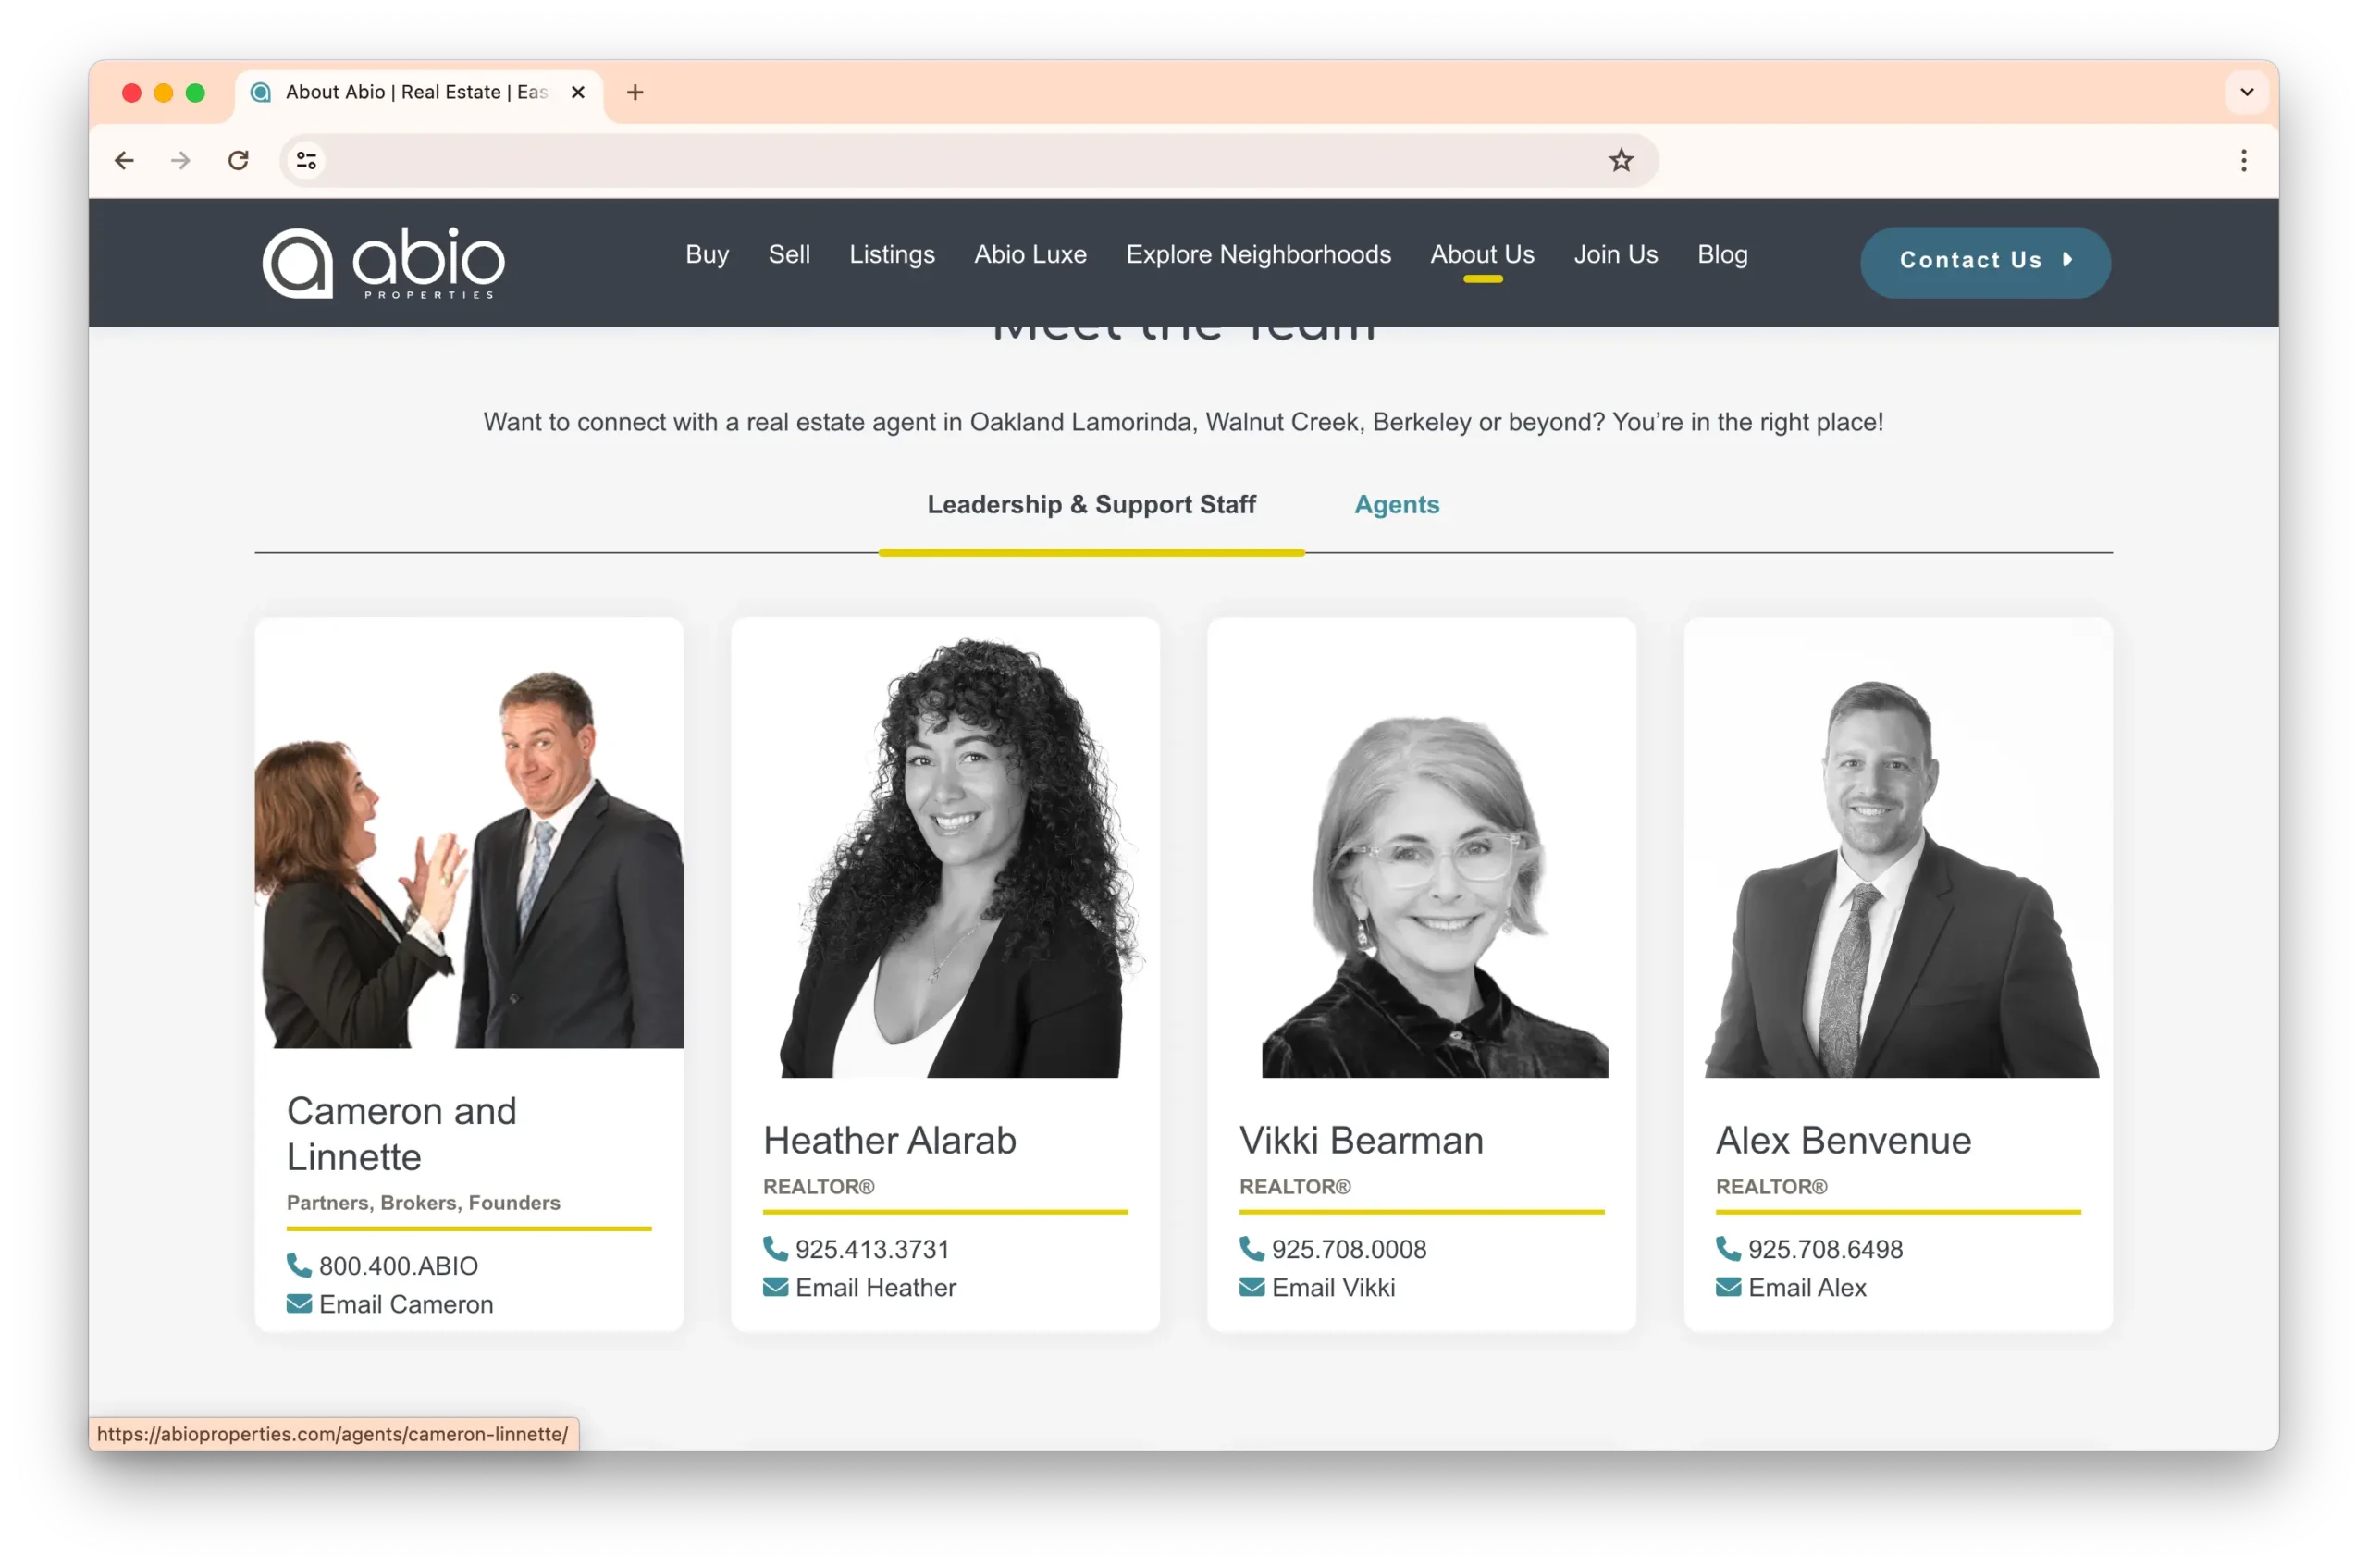 A team page on Abio Properties featuring four real estate agents: Cameron and Linnette (partners and brokers), Heather Alarab (realtor), Vikki Bearman (realtor), and Alex Benvenue (realtor). Each has a contact button below their photo.